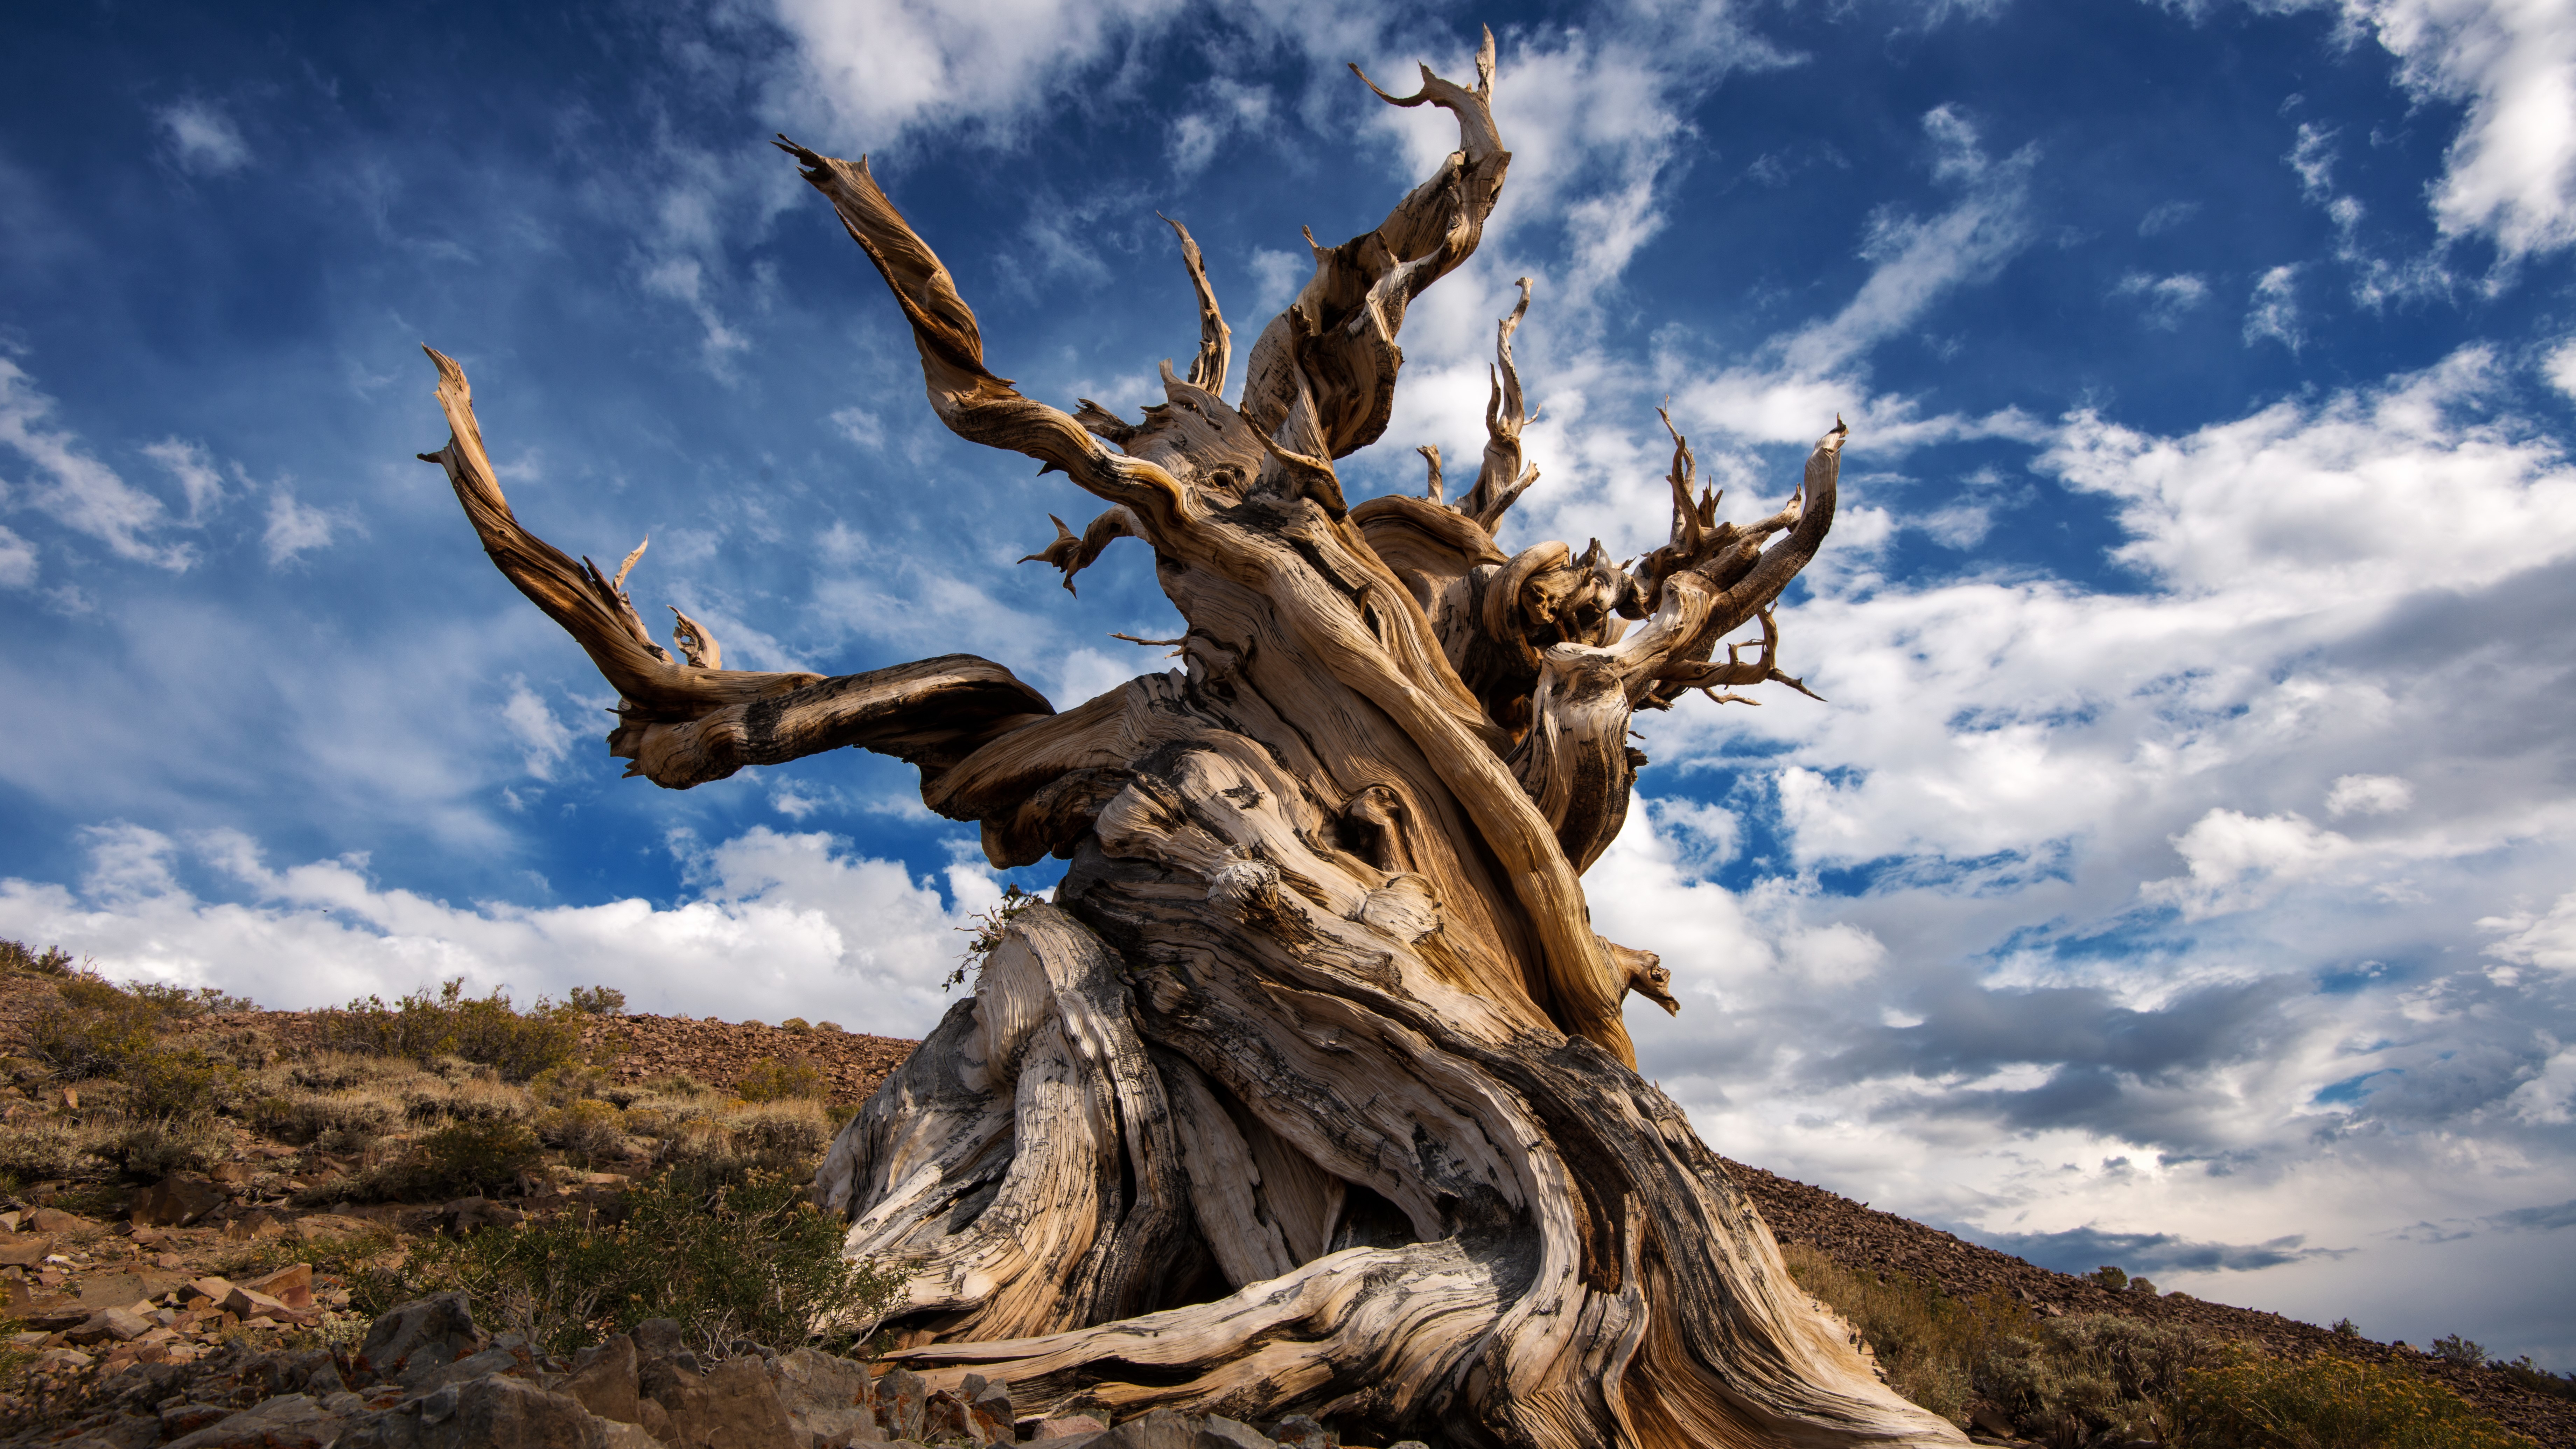 A twisted bristlecone pine on a barren hill with clouds in the background